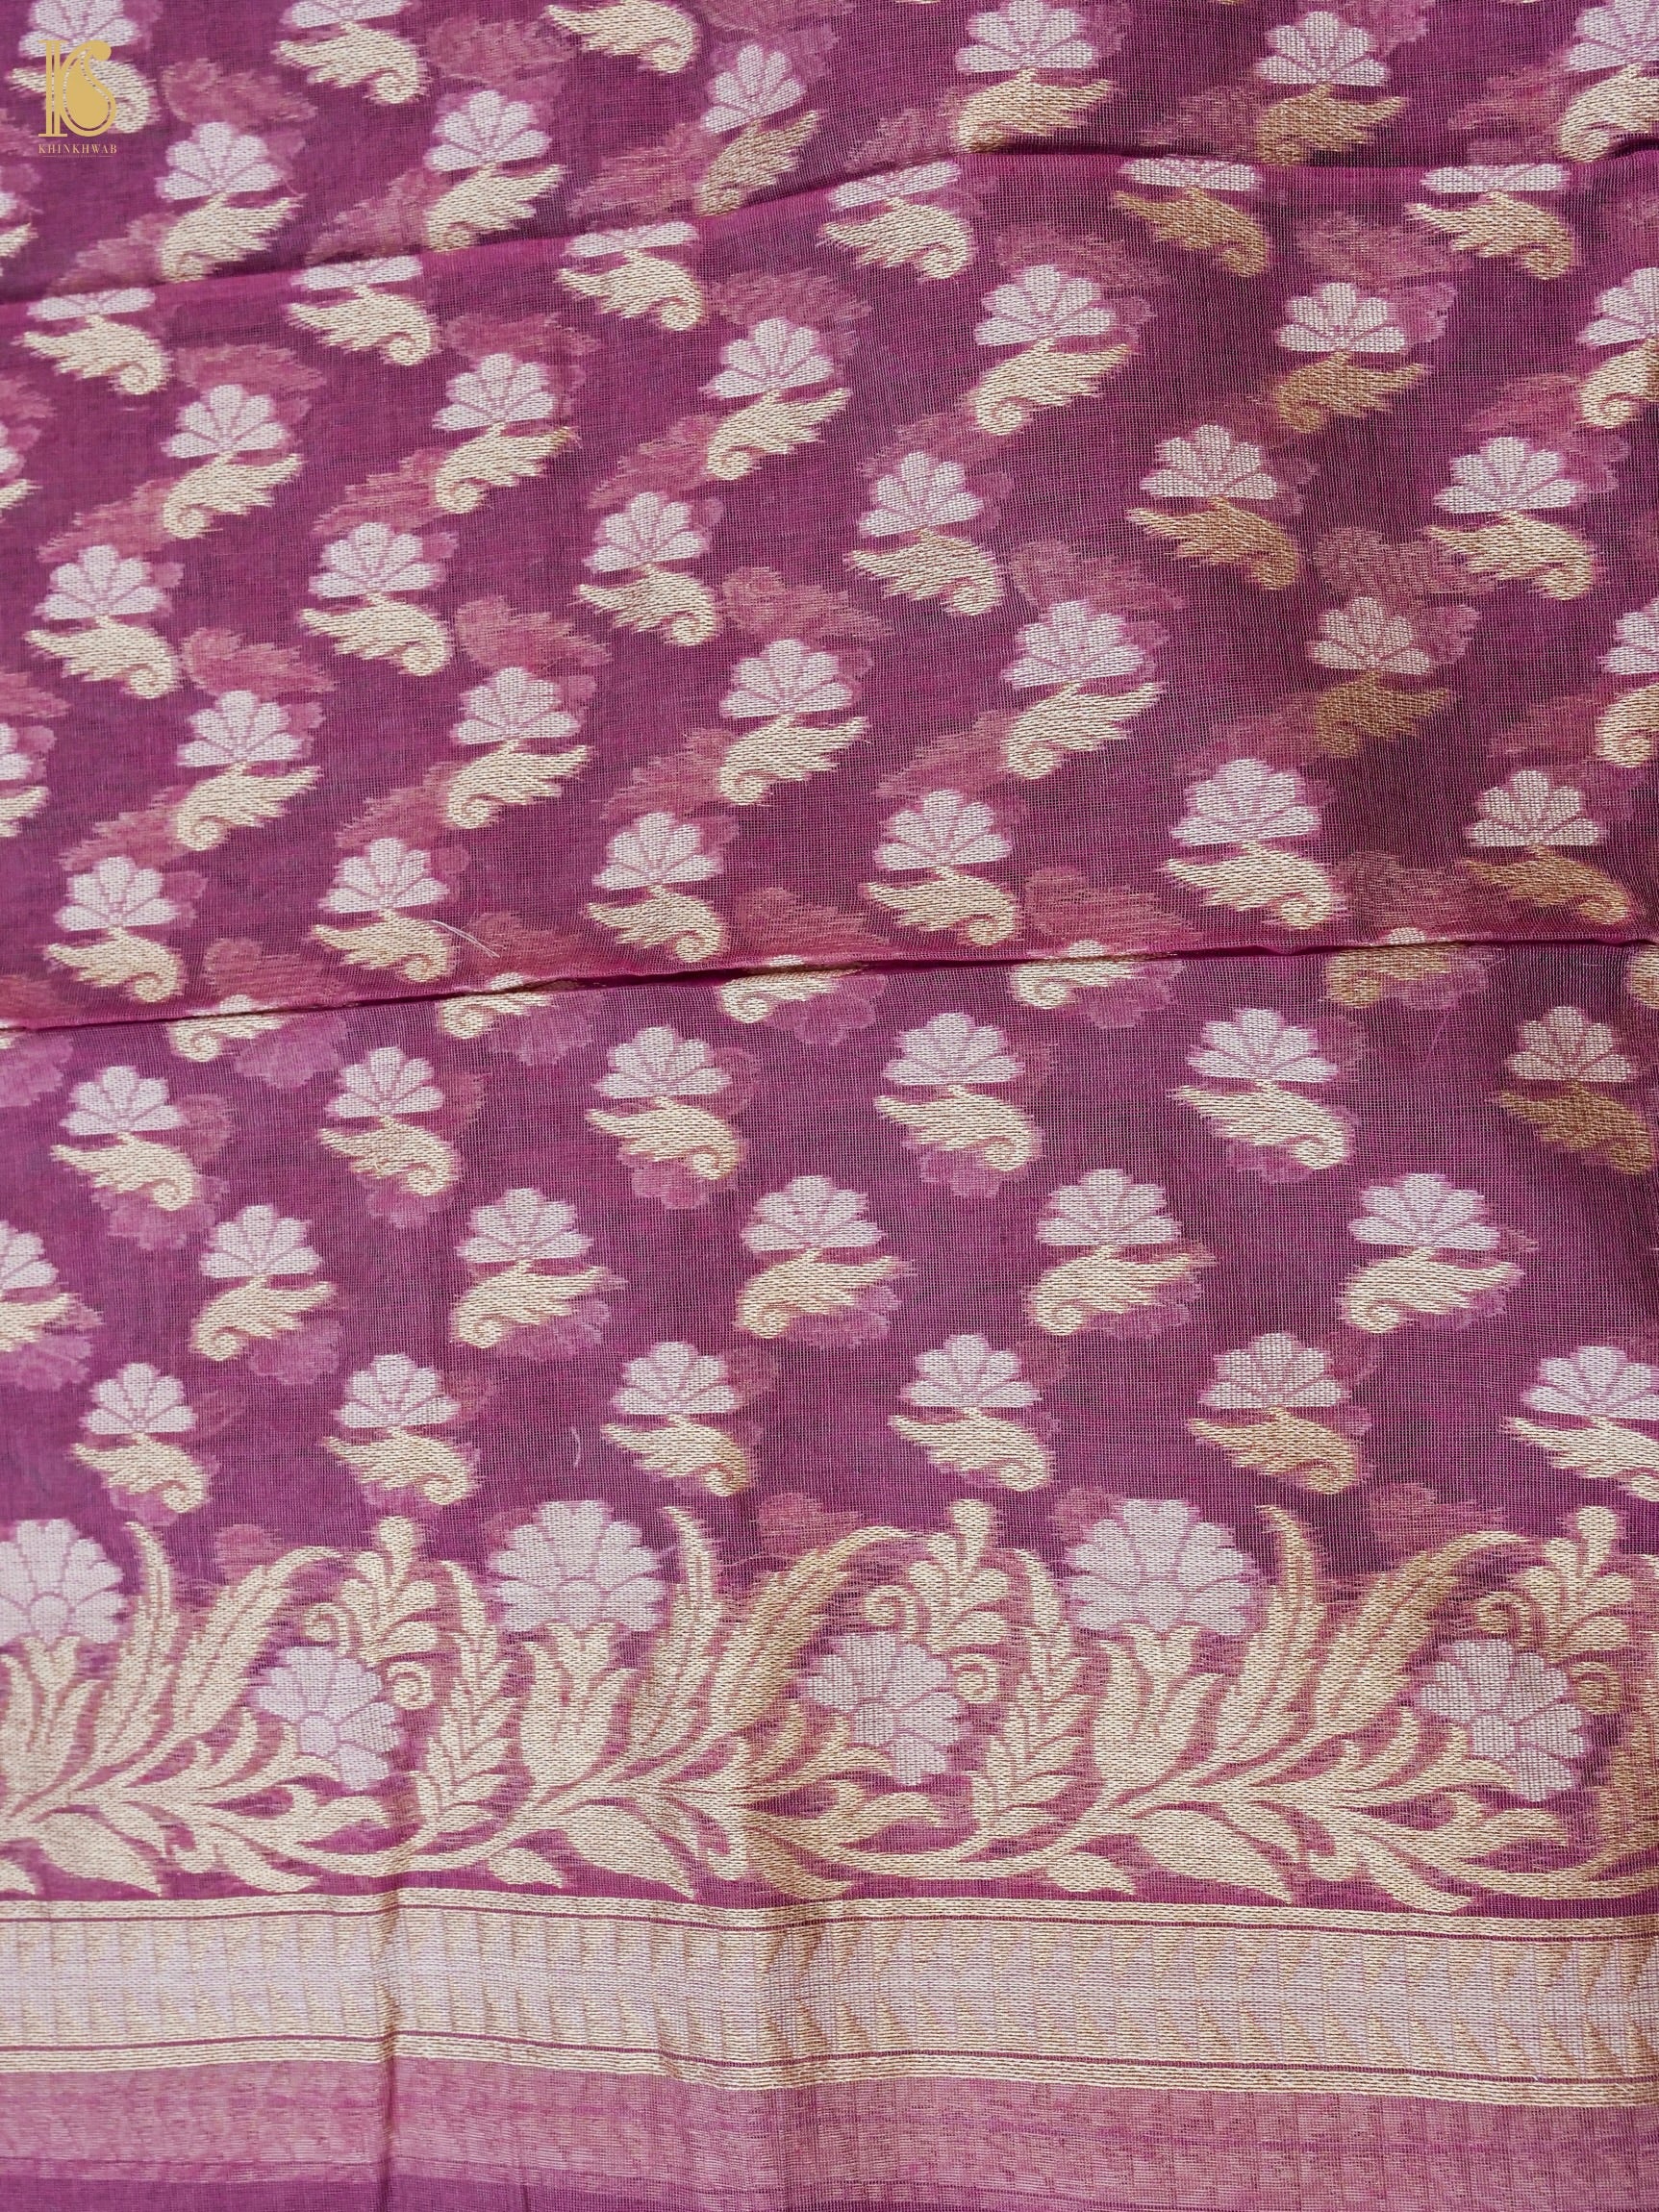 Tvis and Bliss. Onion Pink and Beige Handloom Jamdani Cotton Dress Material